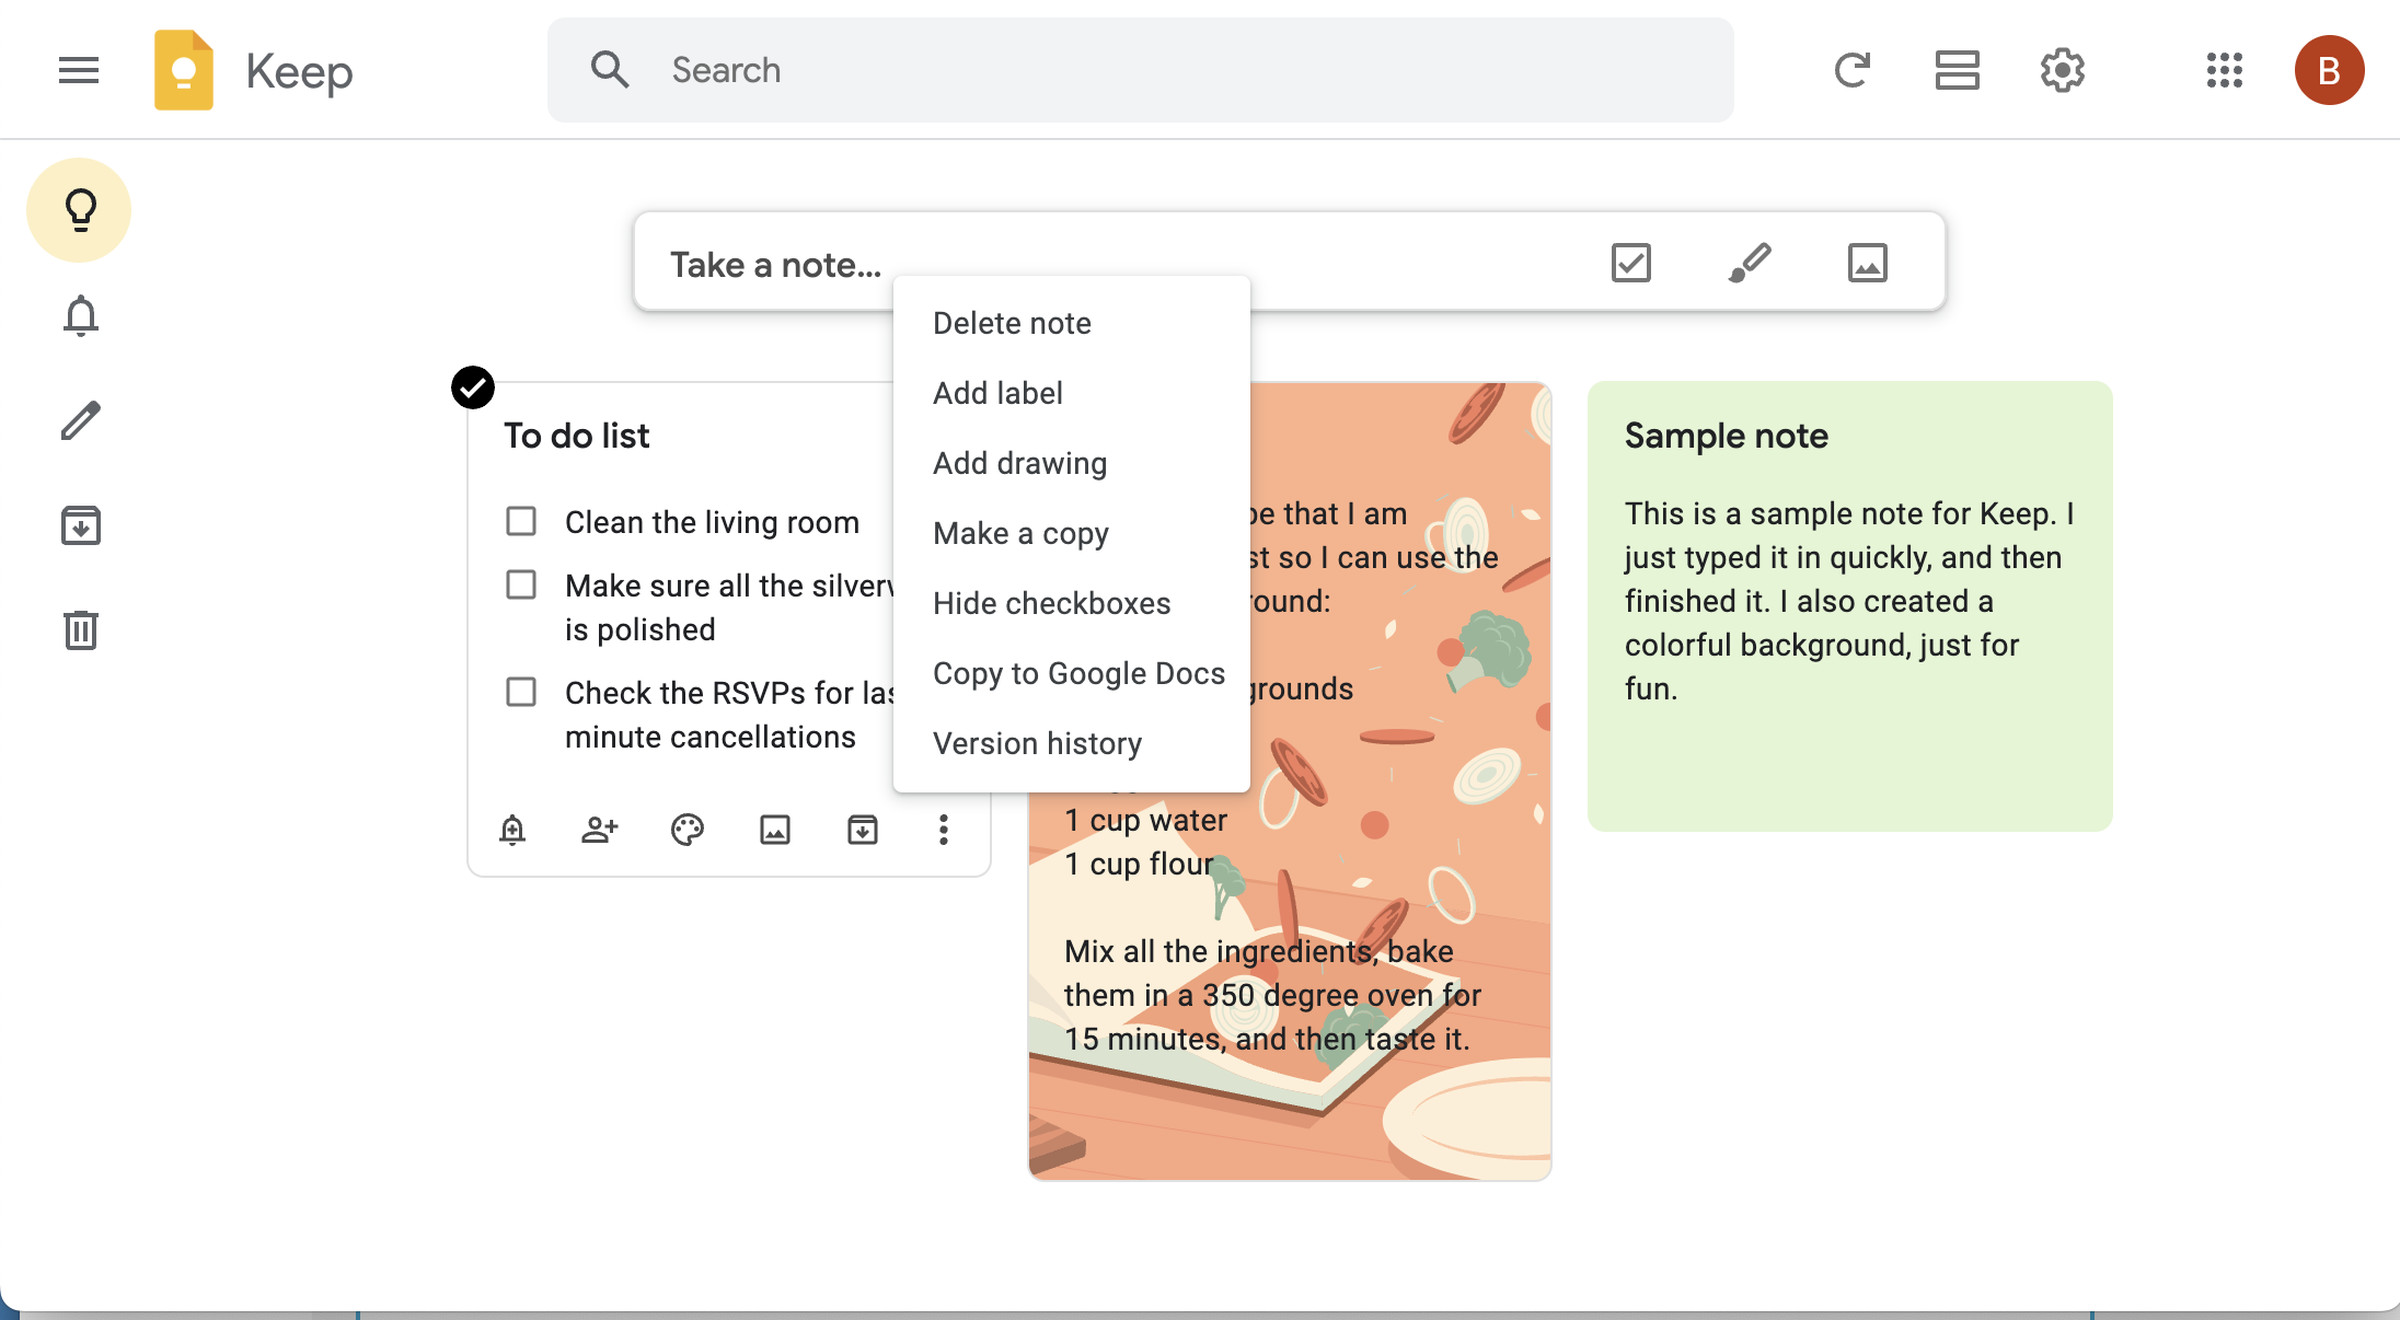 Keep page with three notes: a to-do list, a recipe, and a sample text note, with a drop-down menu inviting you to delete a note or perform other tasks.